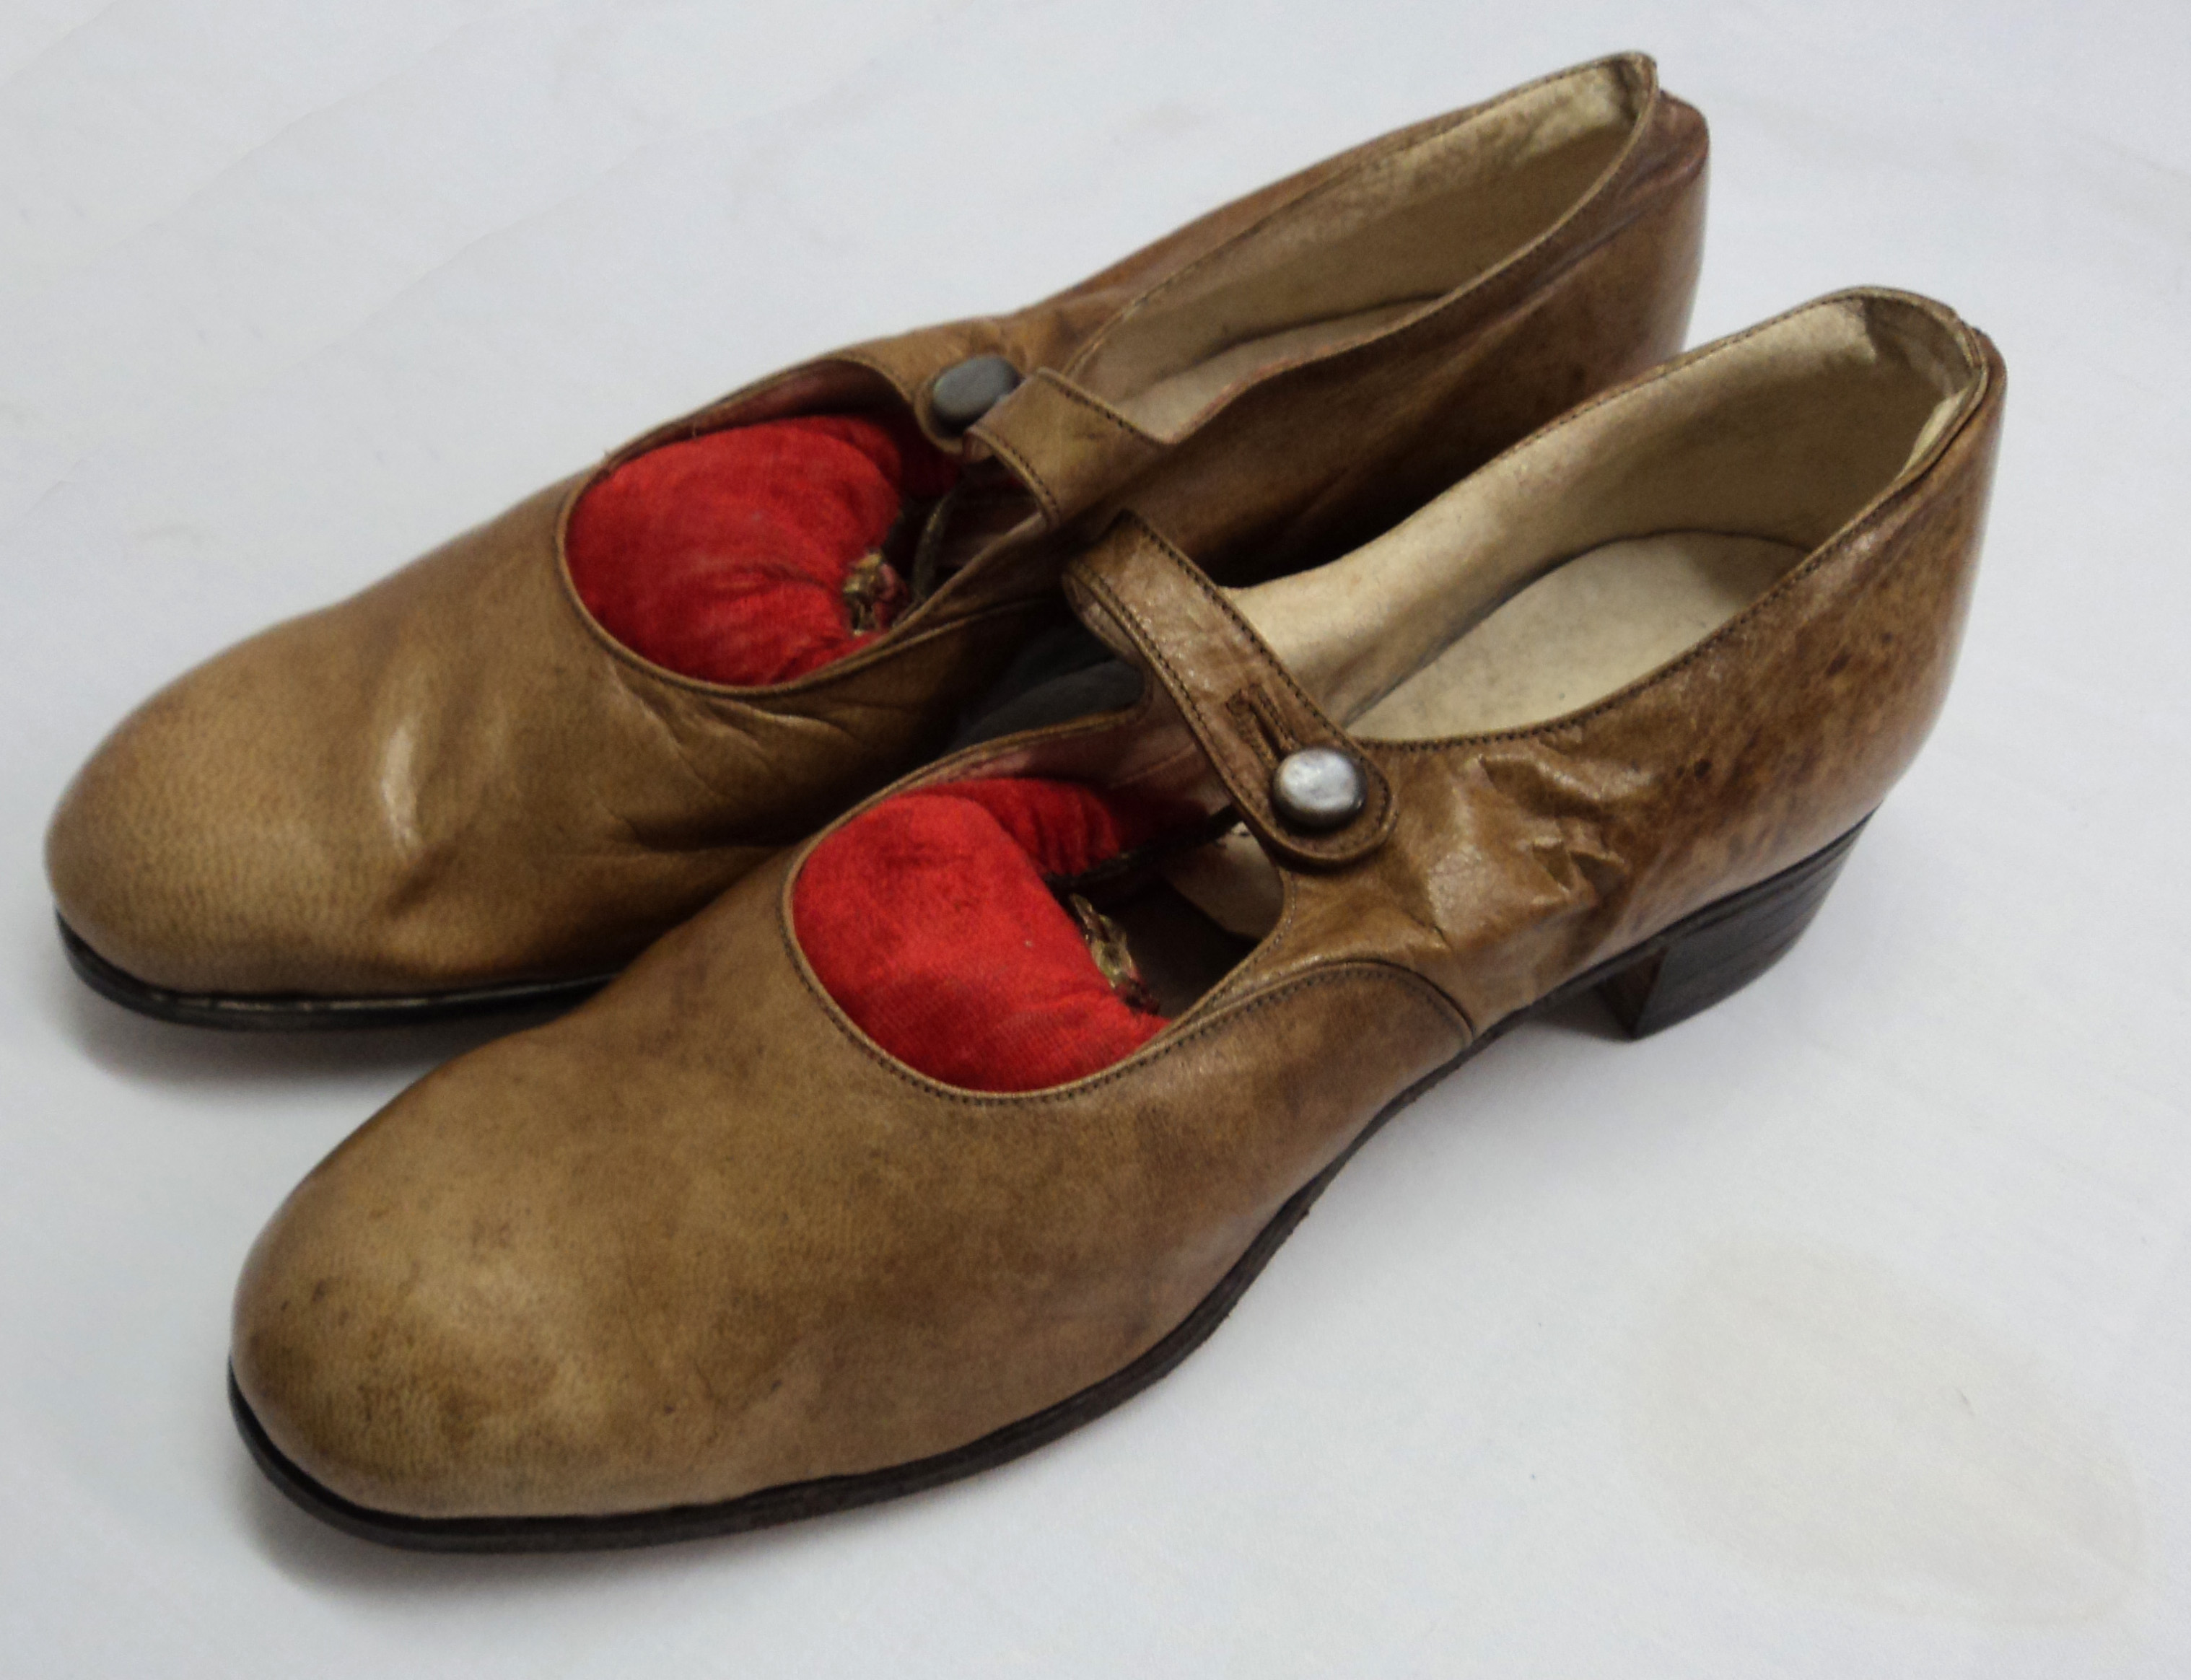 A collection of vintage ladies decorative evening shoes including leather Mary Janes, etc. - Image 2 of 13